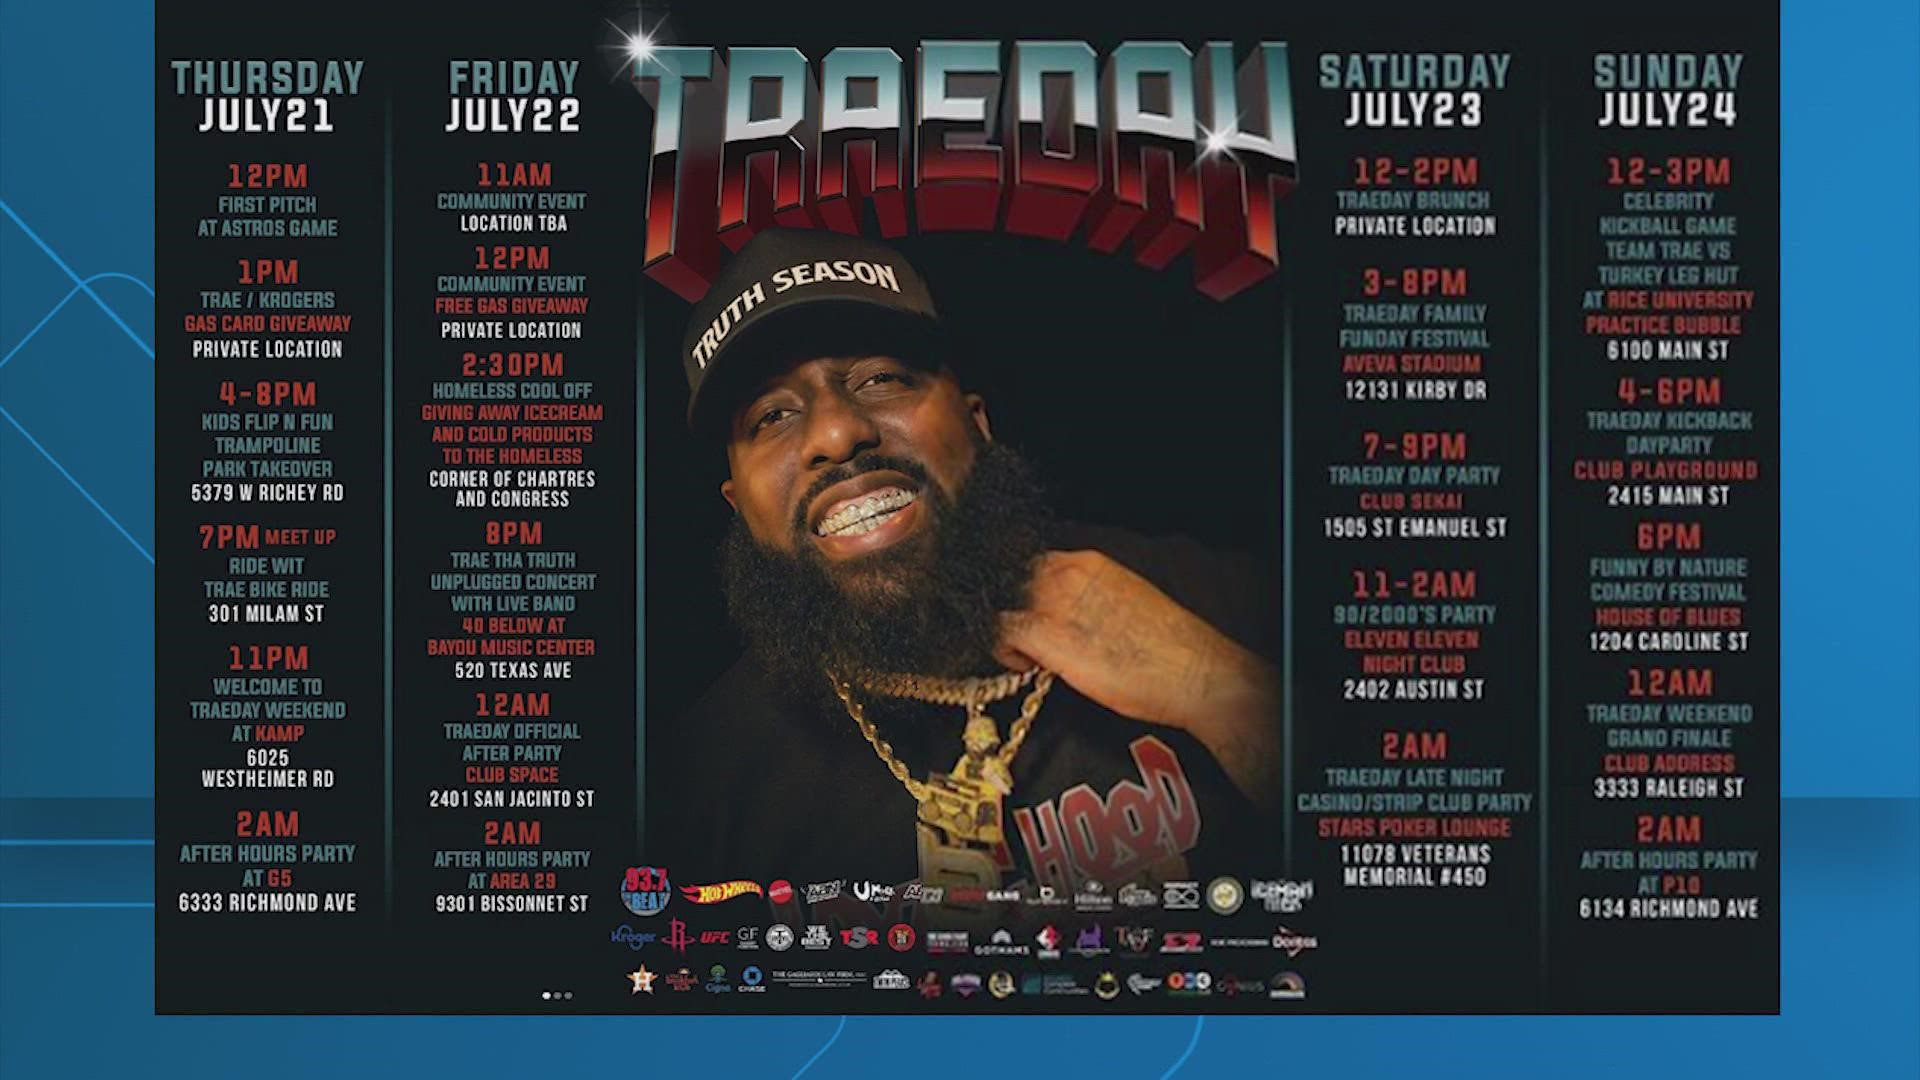 Trae Tha Truth is hosting several events the weekend of July 21 to July 24 in honor of his annual "Trae Day Weekend."